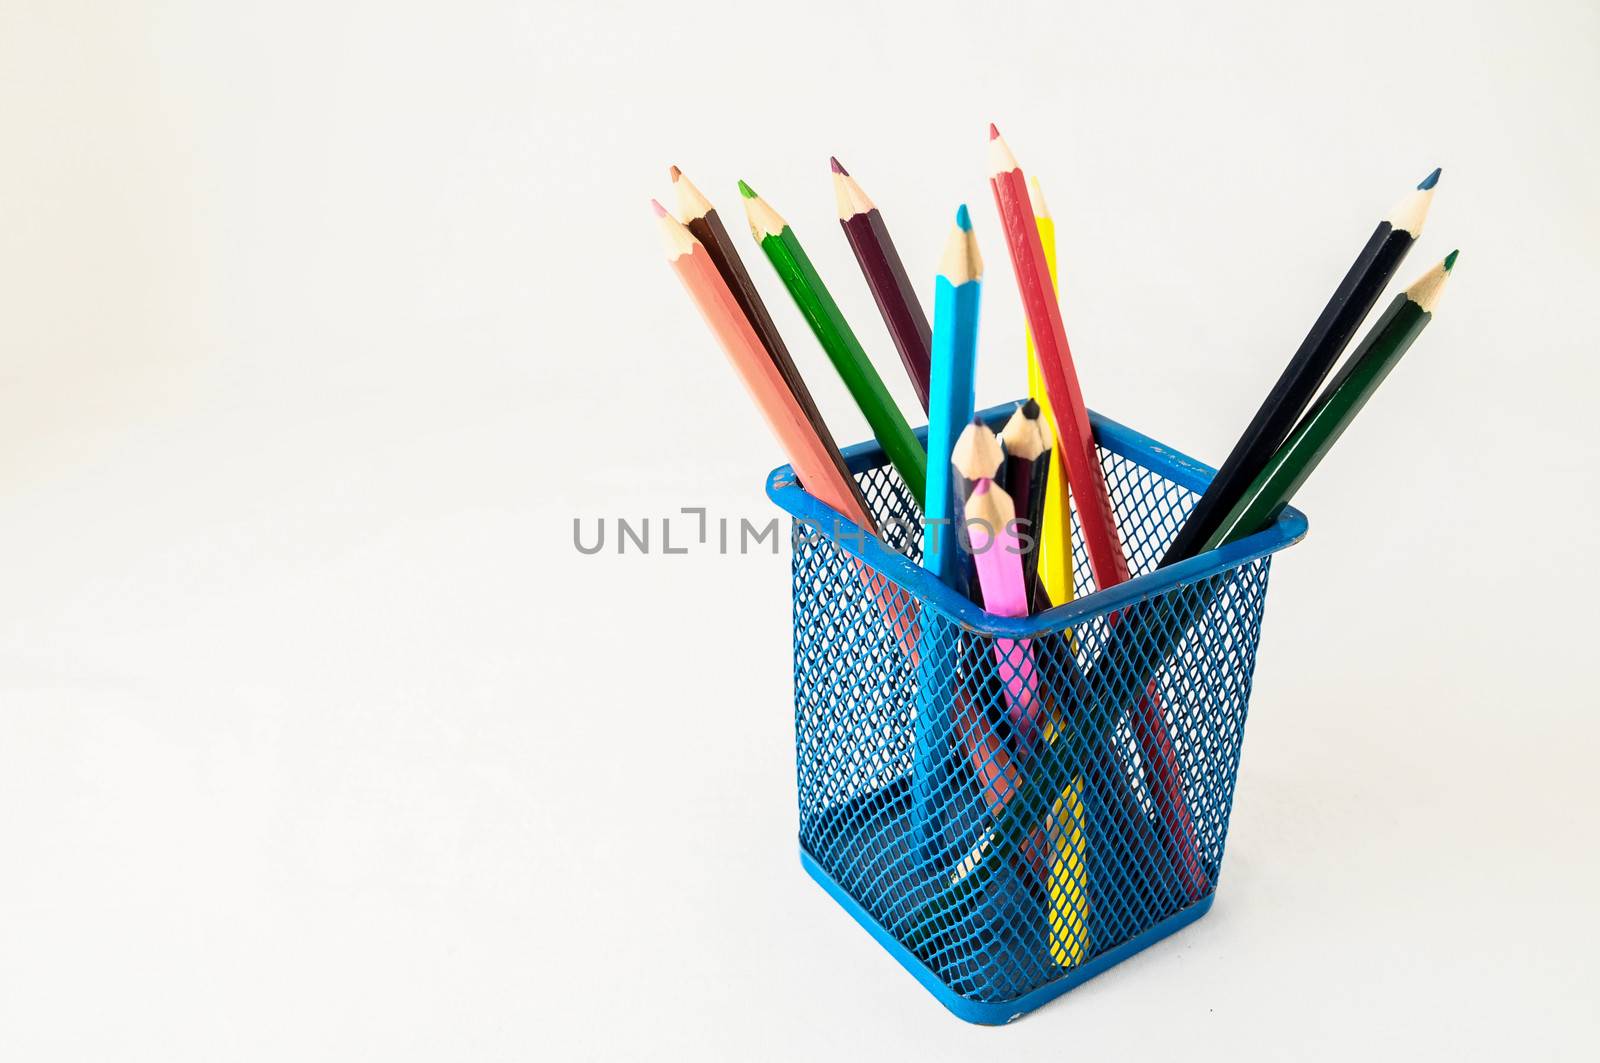 New Colored Pencils Textured by underworld